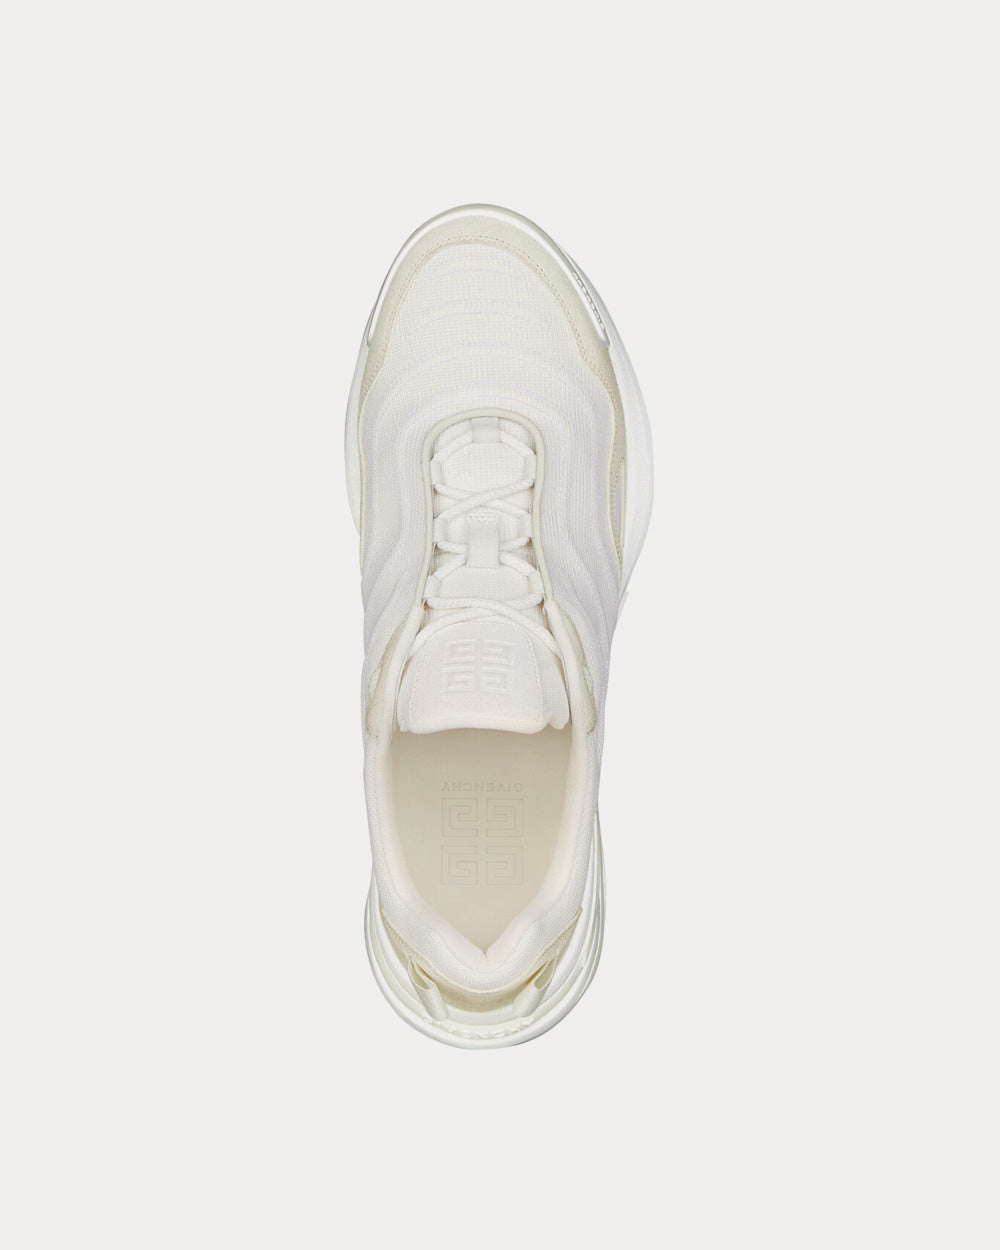 Givenchy - GIV 1 Light Technical Canvas & Suede White Low Top Sneakers